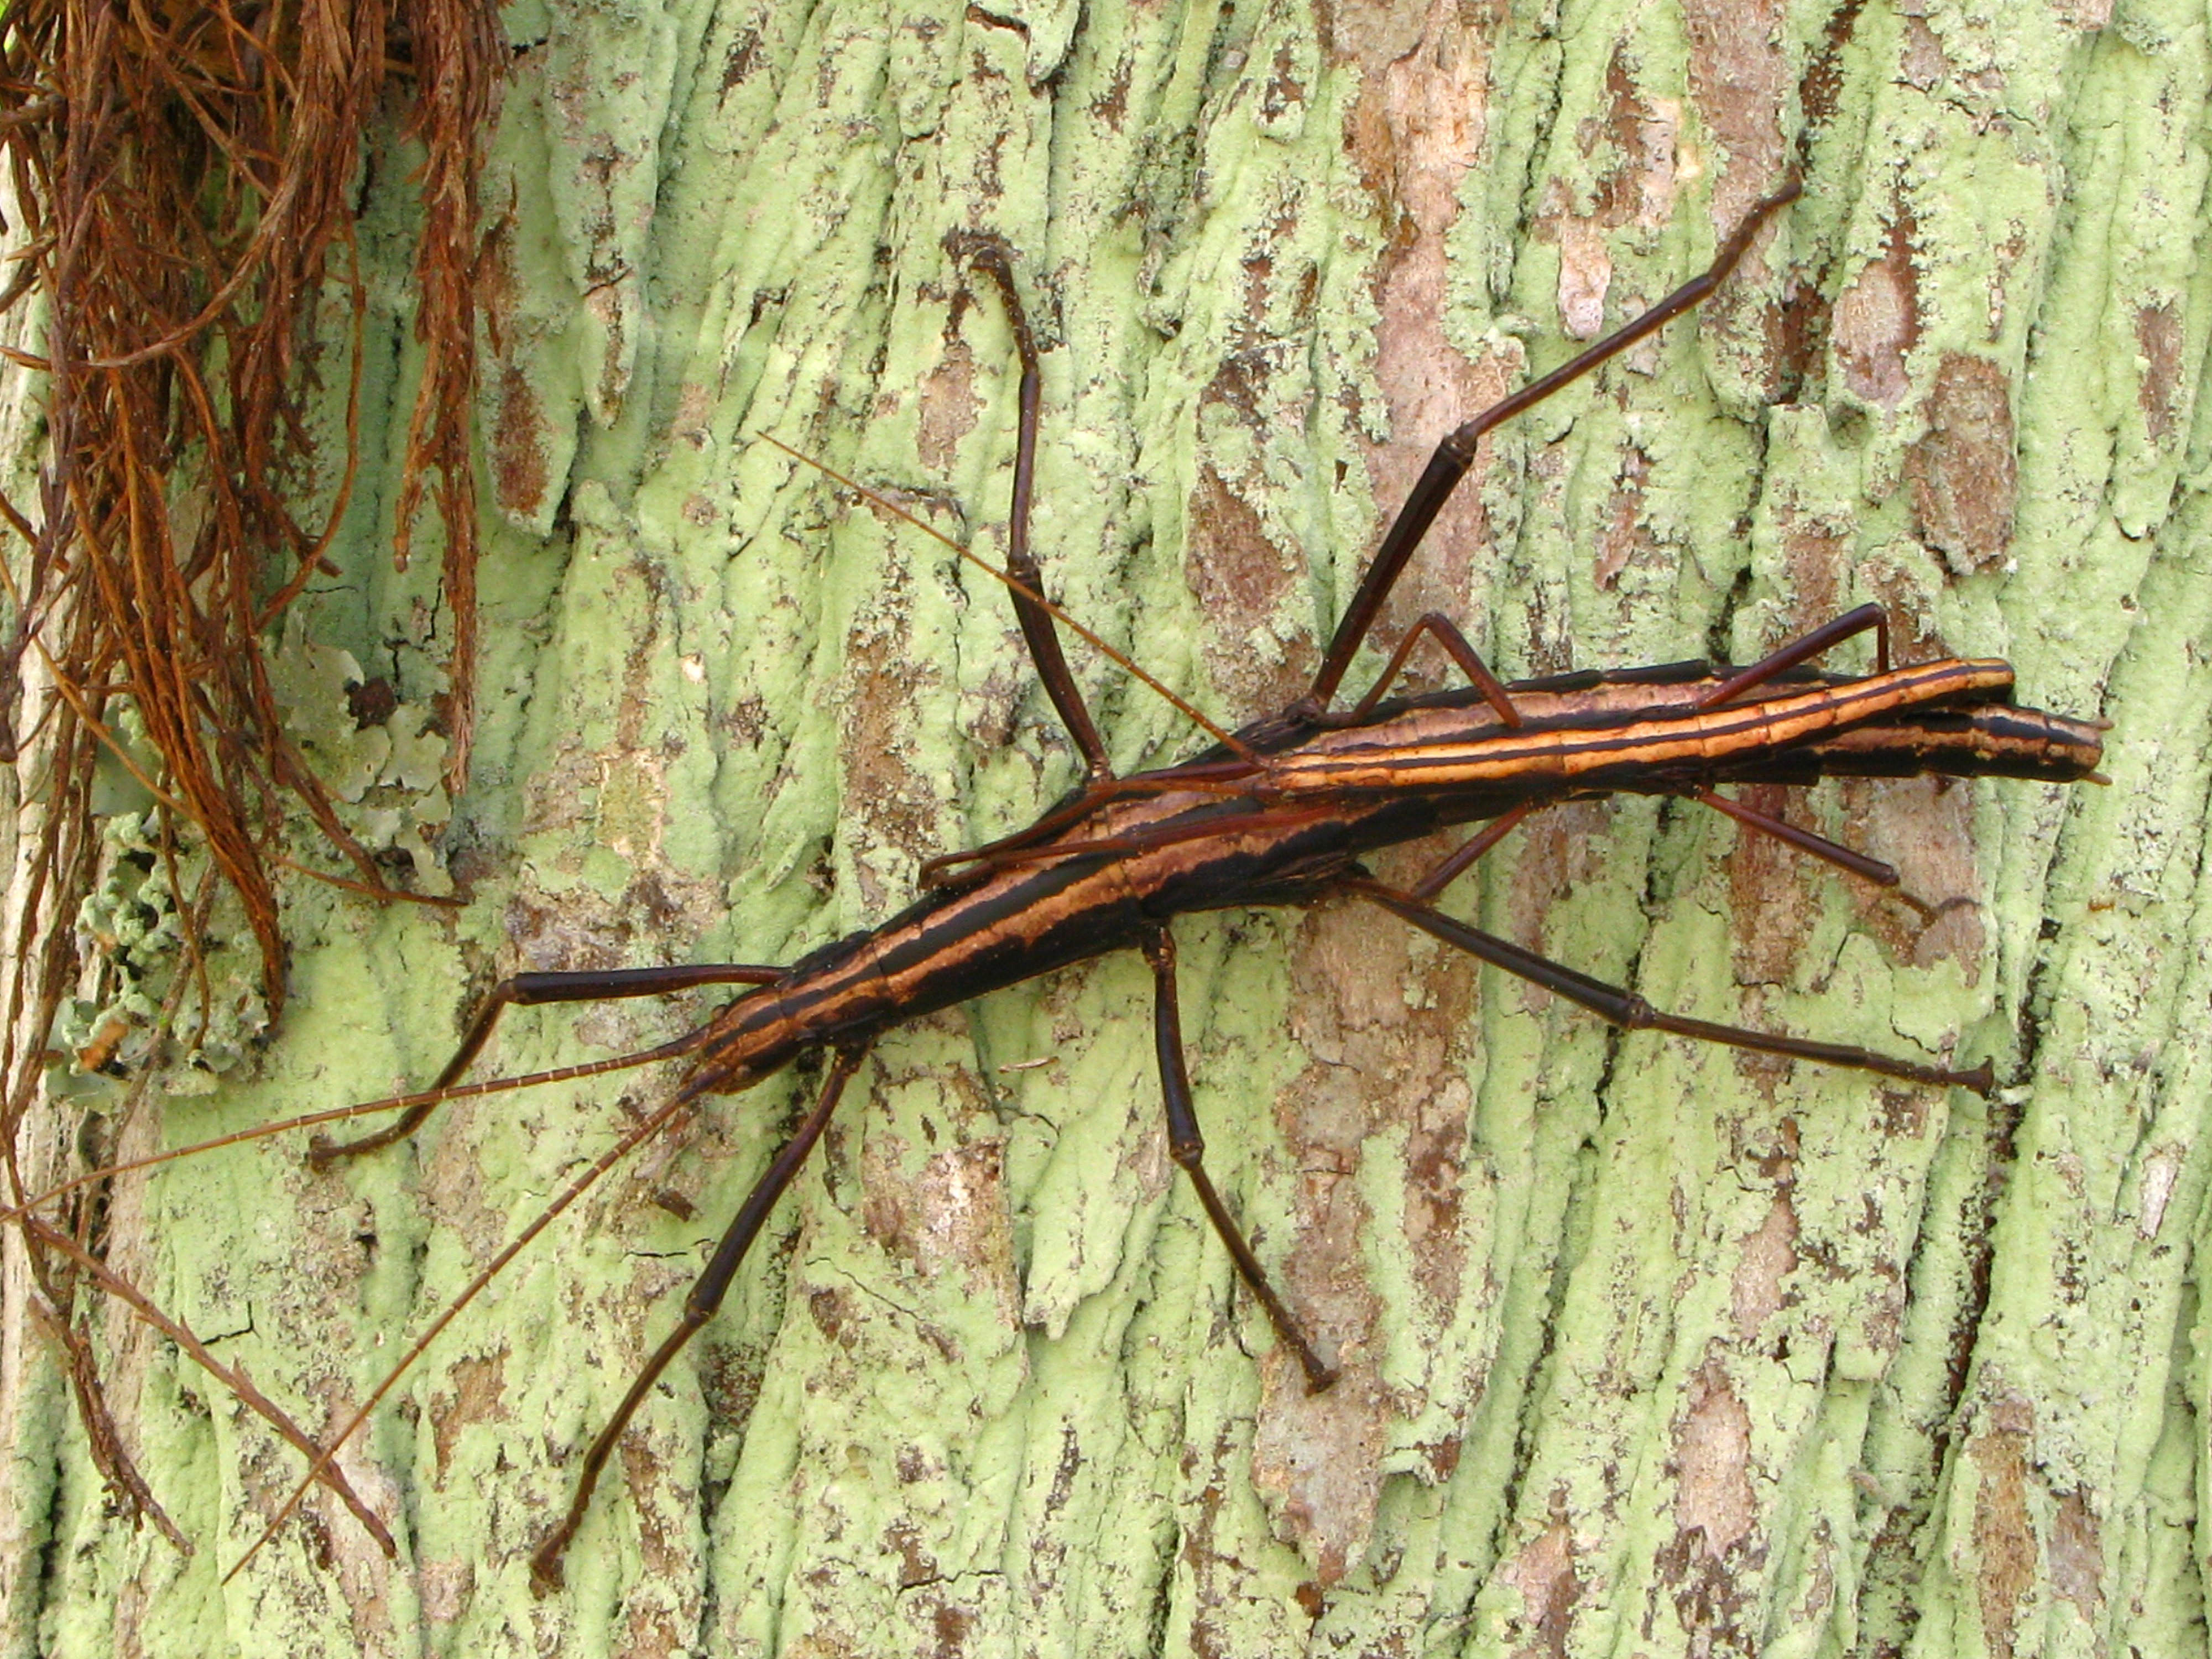 Adult female and male two-striped walking stick pair. Photo used courtesy of Alan Cressler.